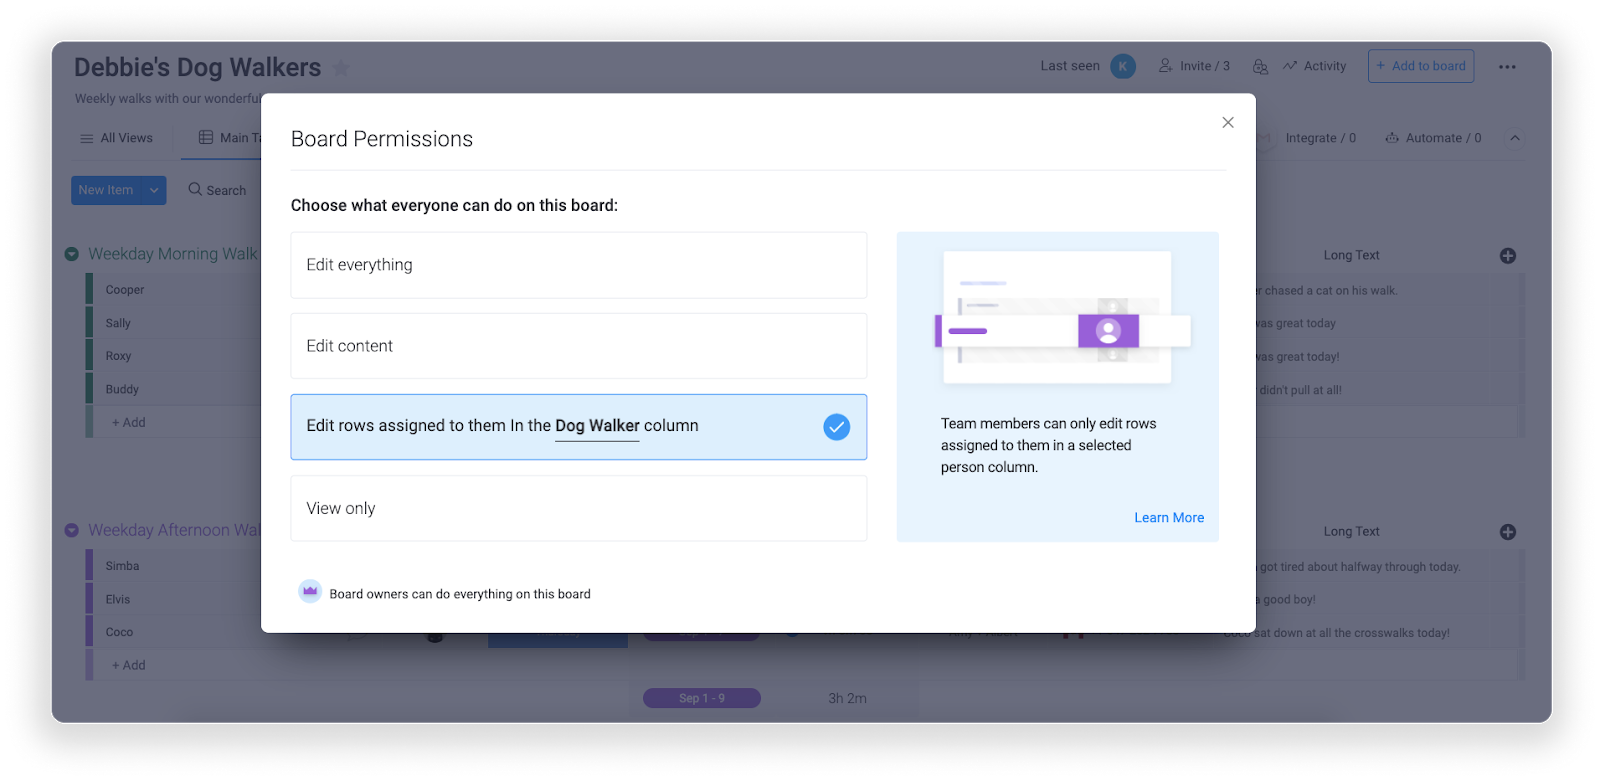 monday.com allows users to assign board permissions for specific users